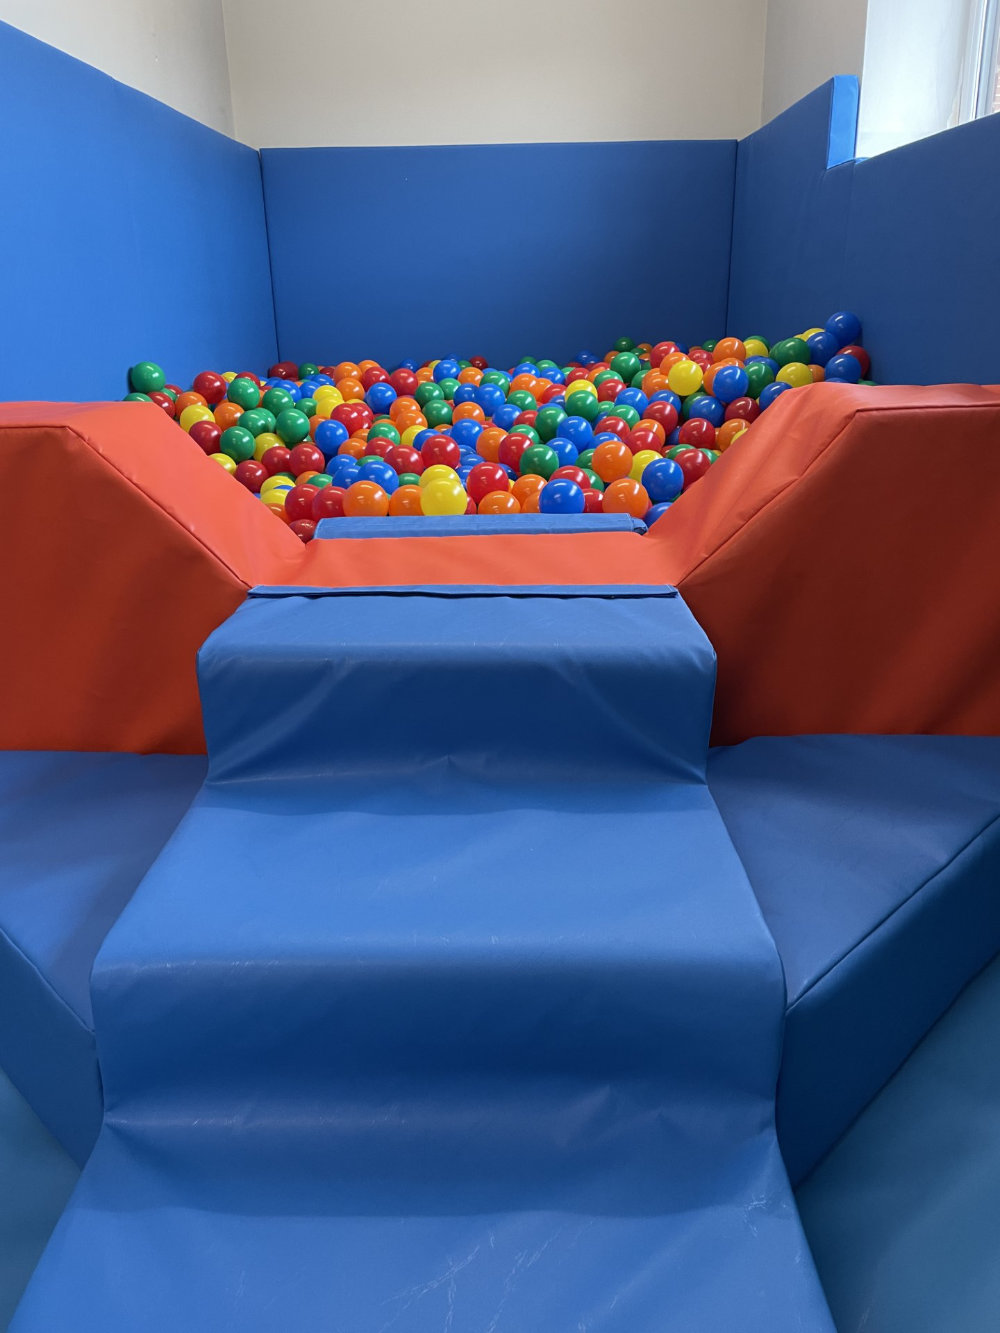 Soft play ball pit area